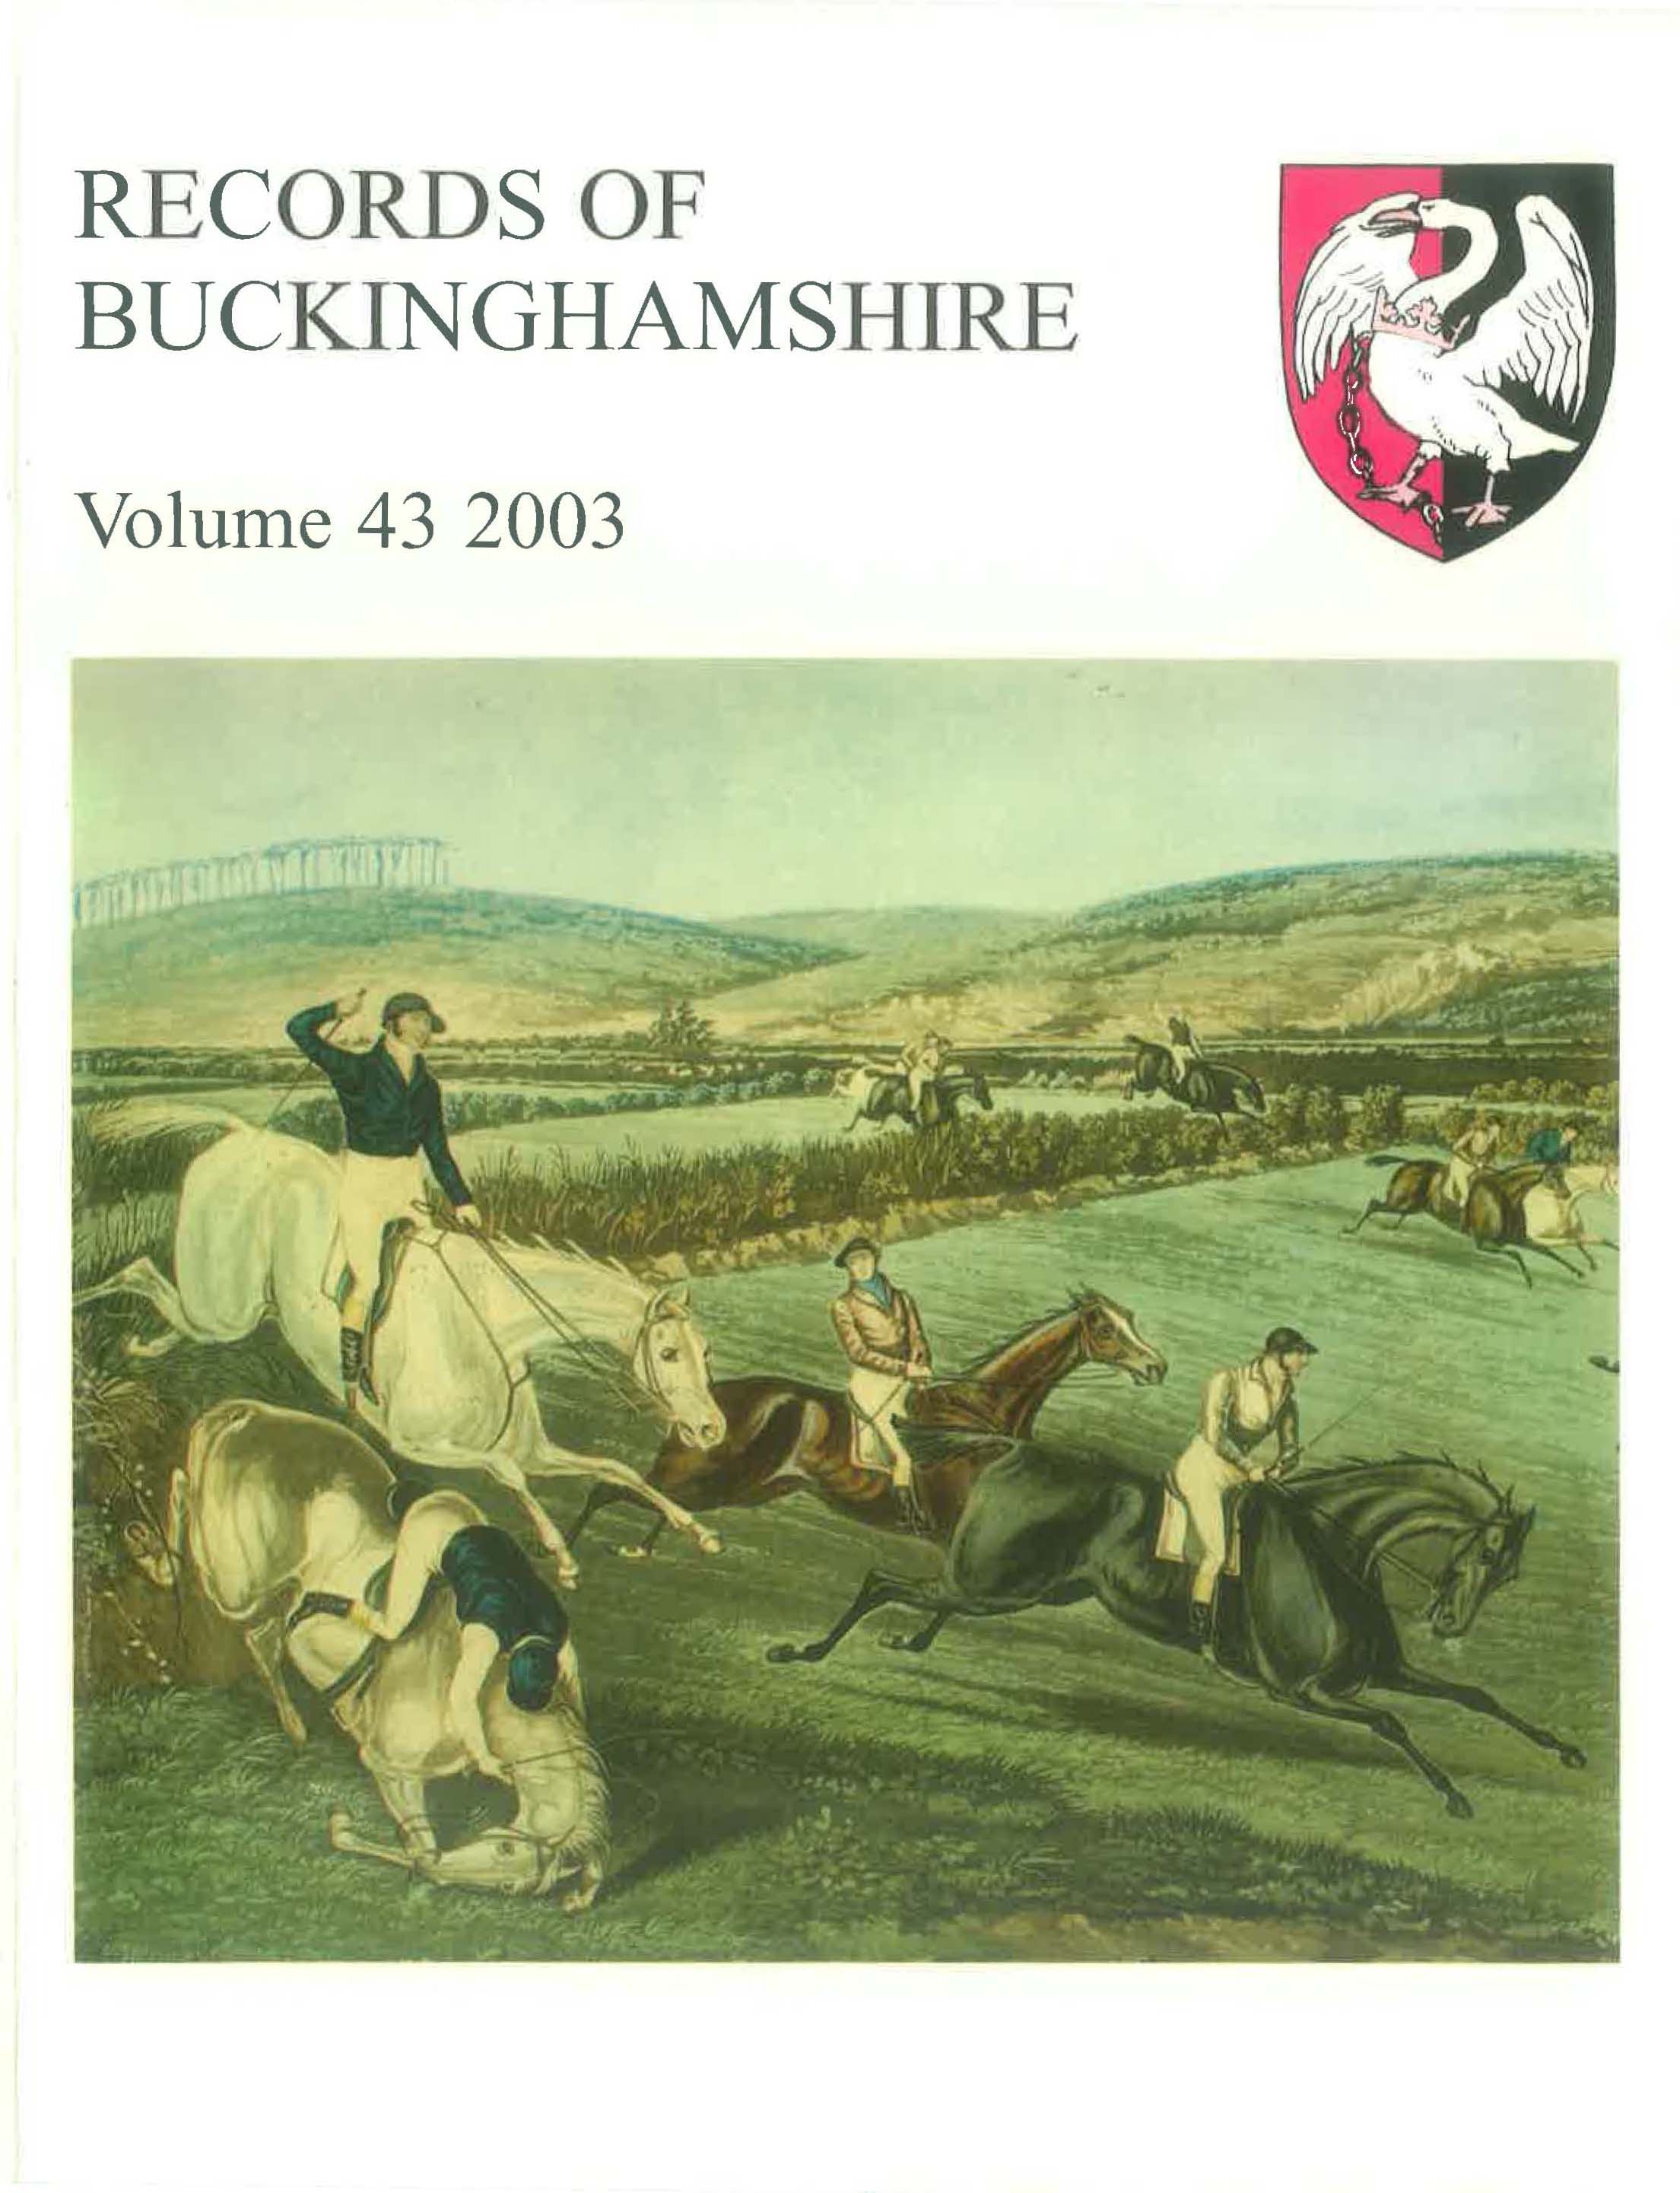 Cover of Records volume 43